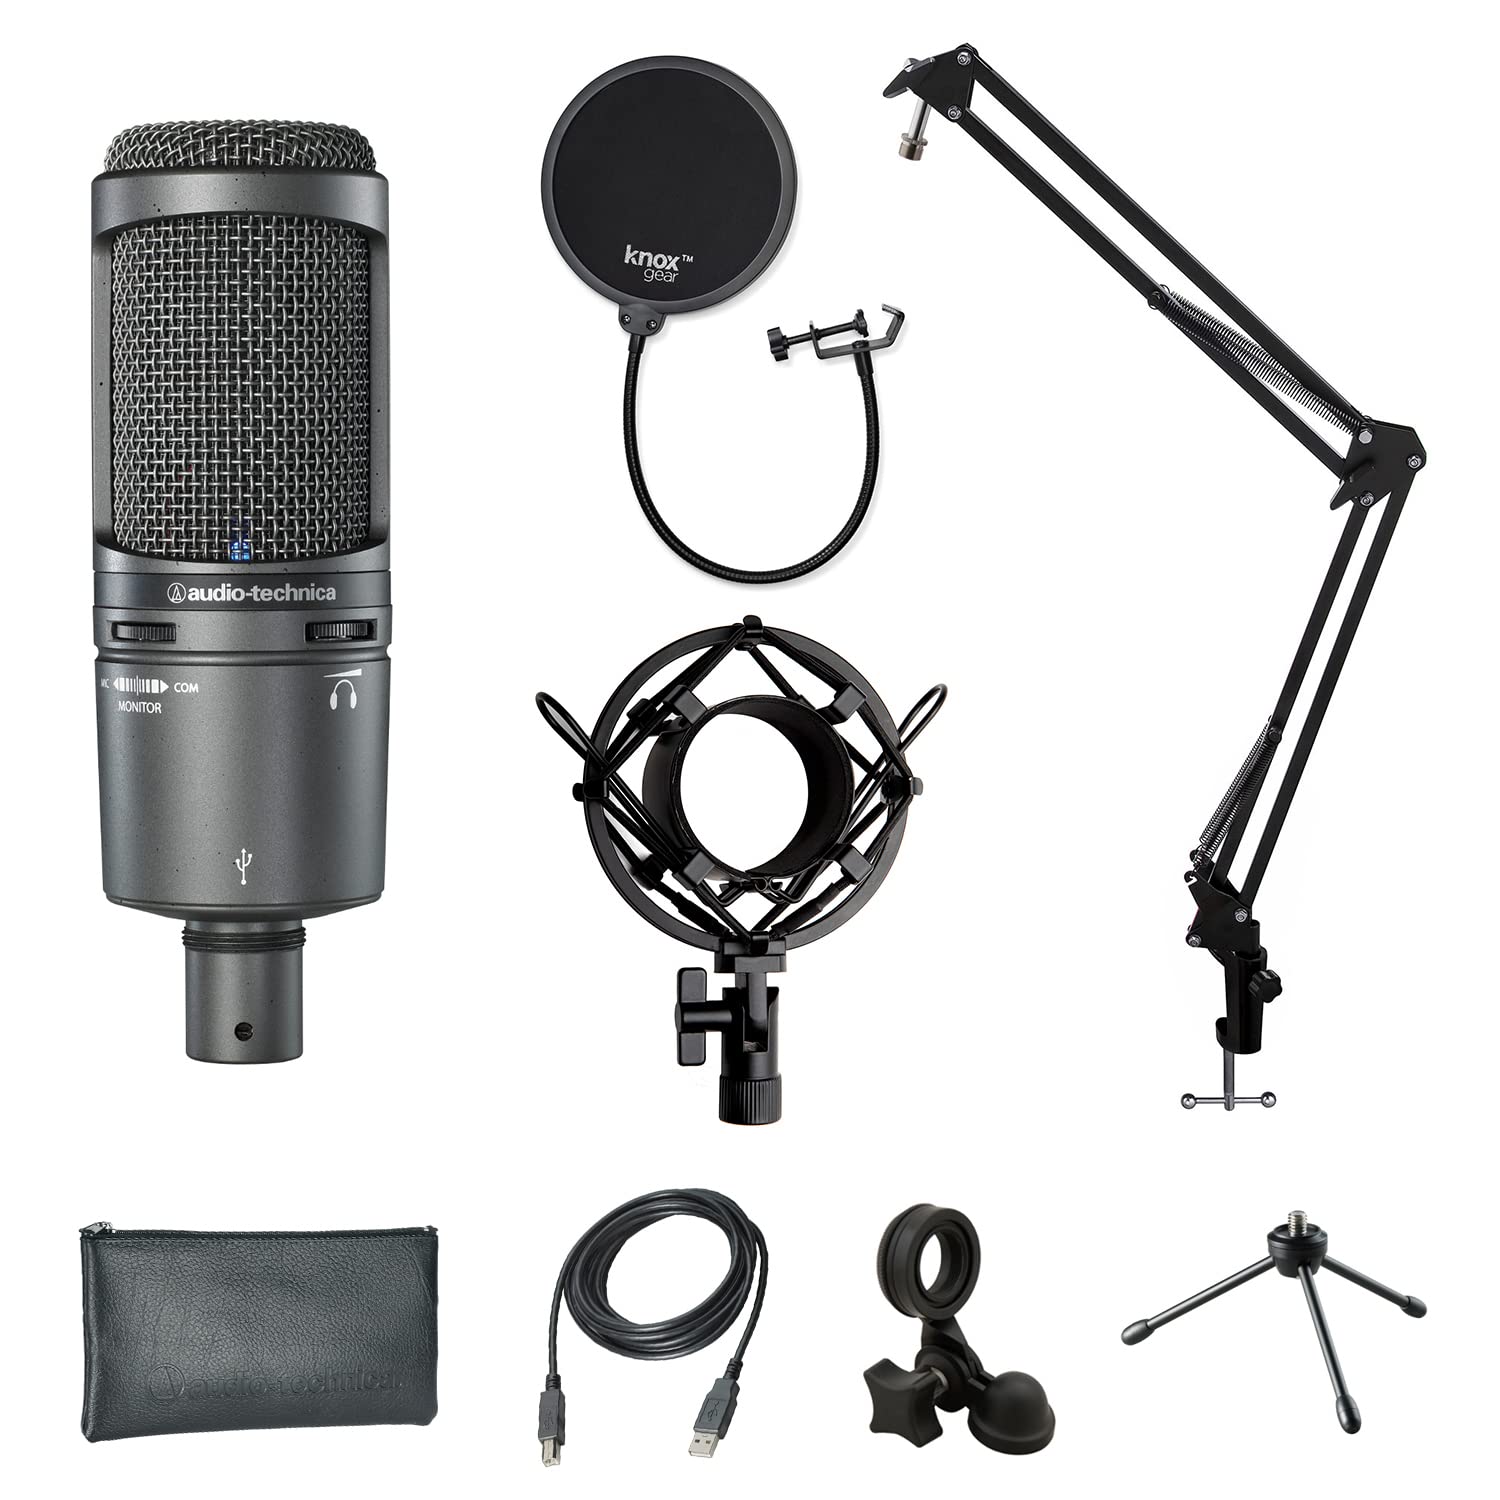 audio-technica AT2020USB+ Condenser Microphone with Shock Mount, Boom Arm, and Pop Filter